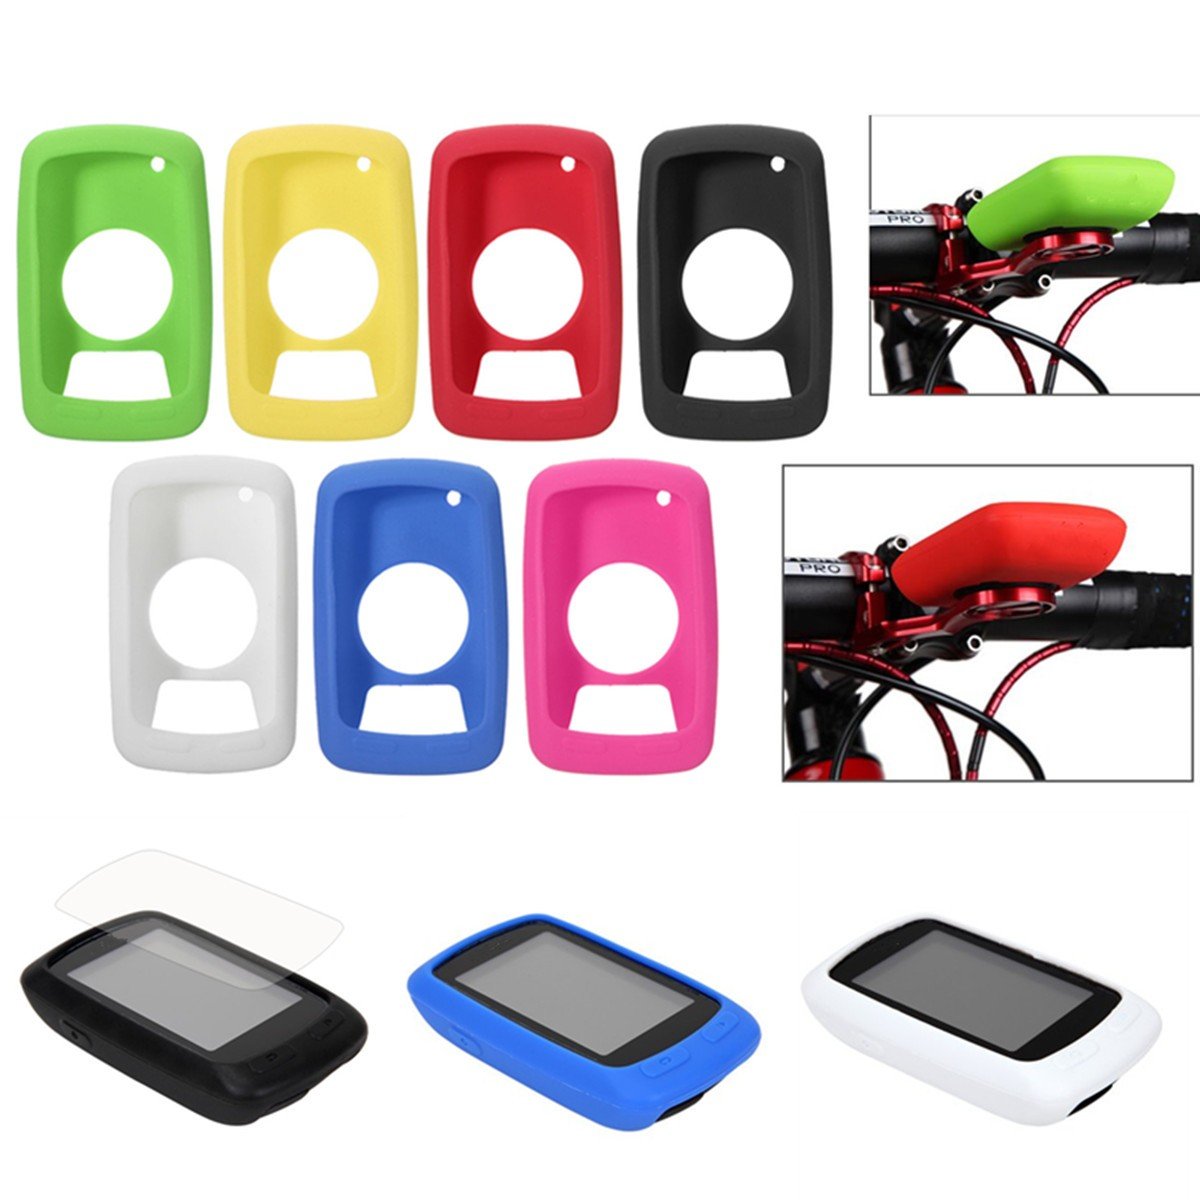 Cycling Silicone Rubber Gel Skin Case Cover For Garmin Edge 520 GPS Computer 